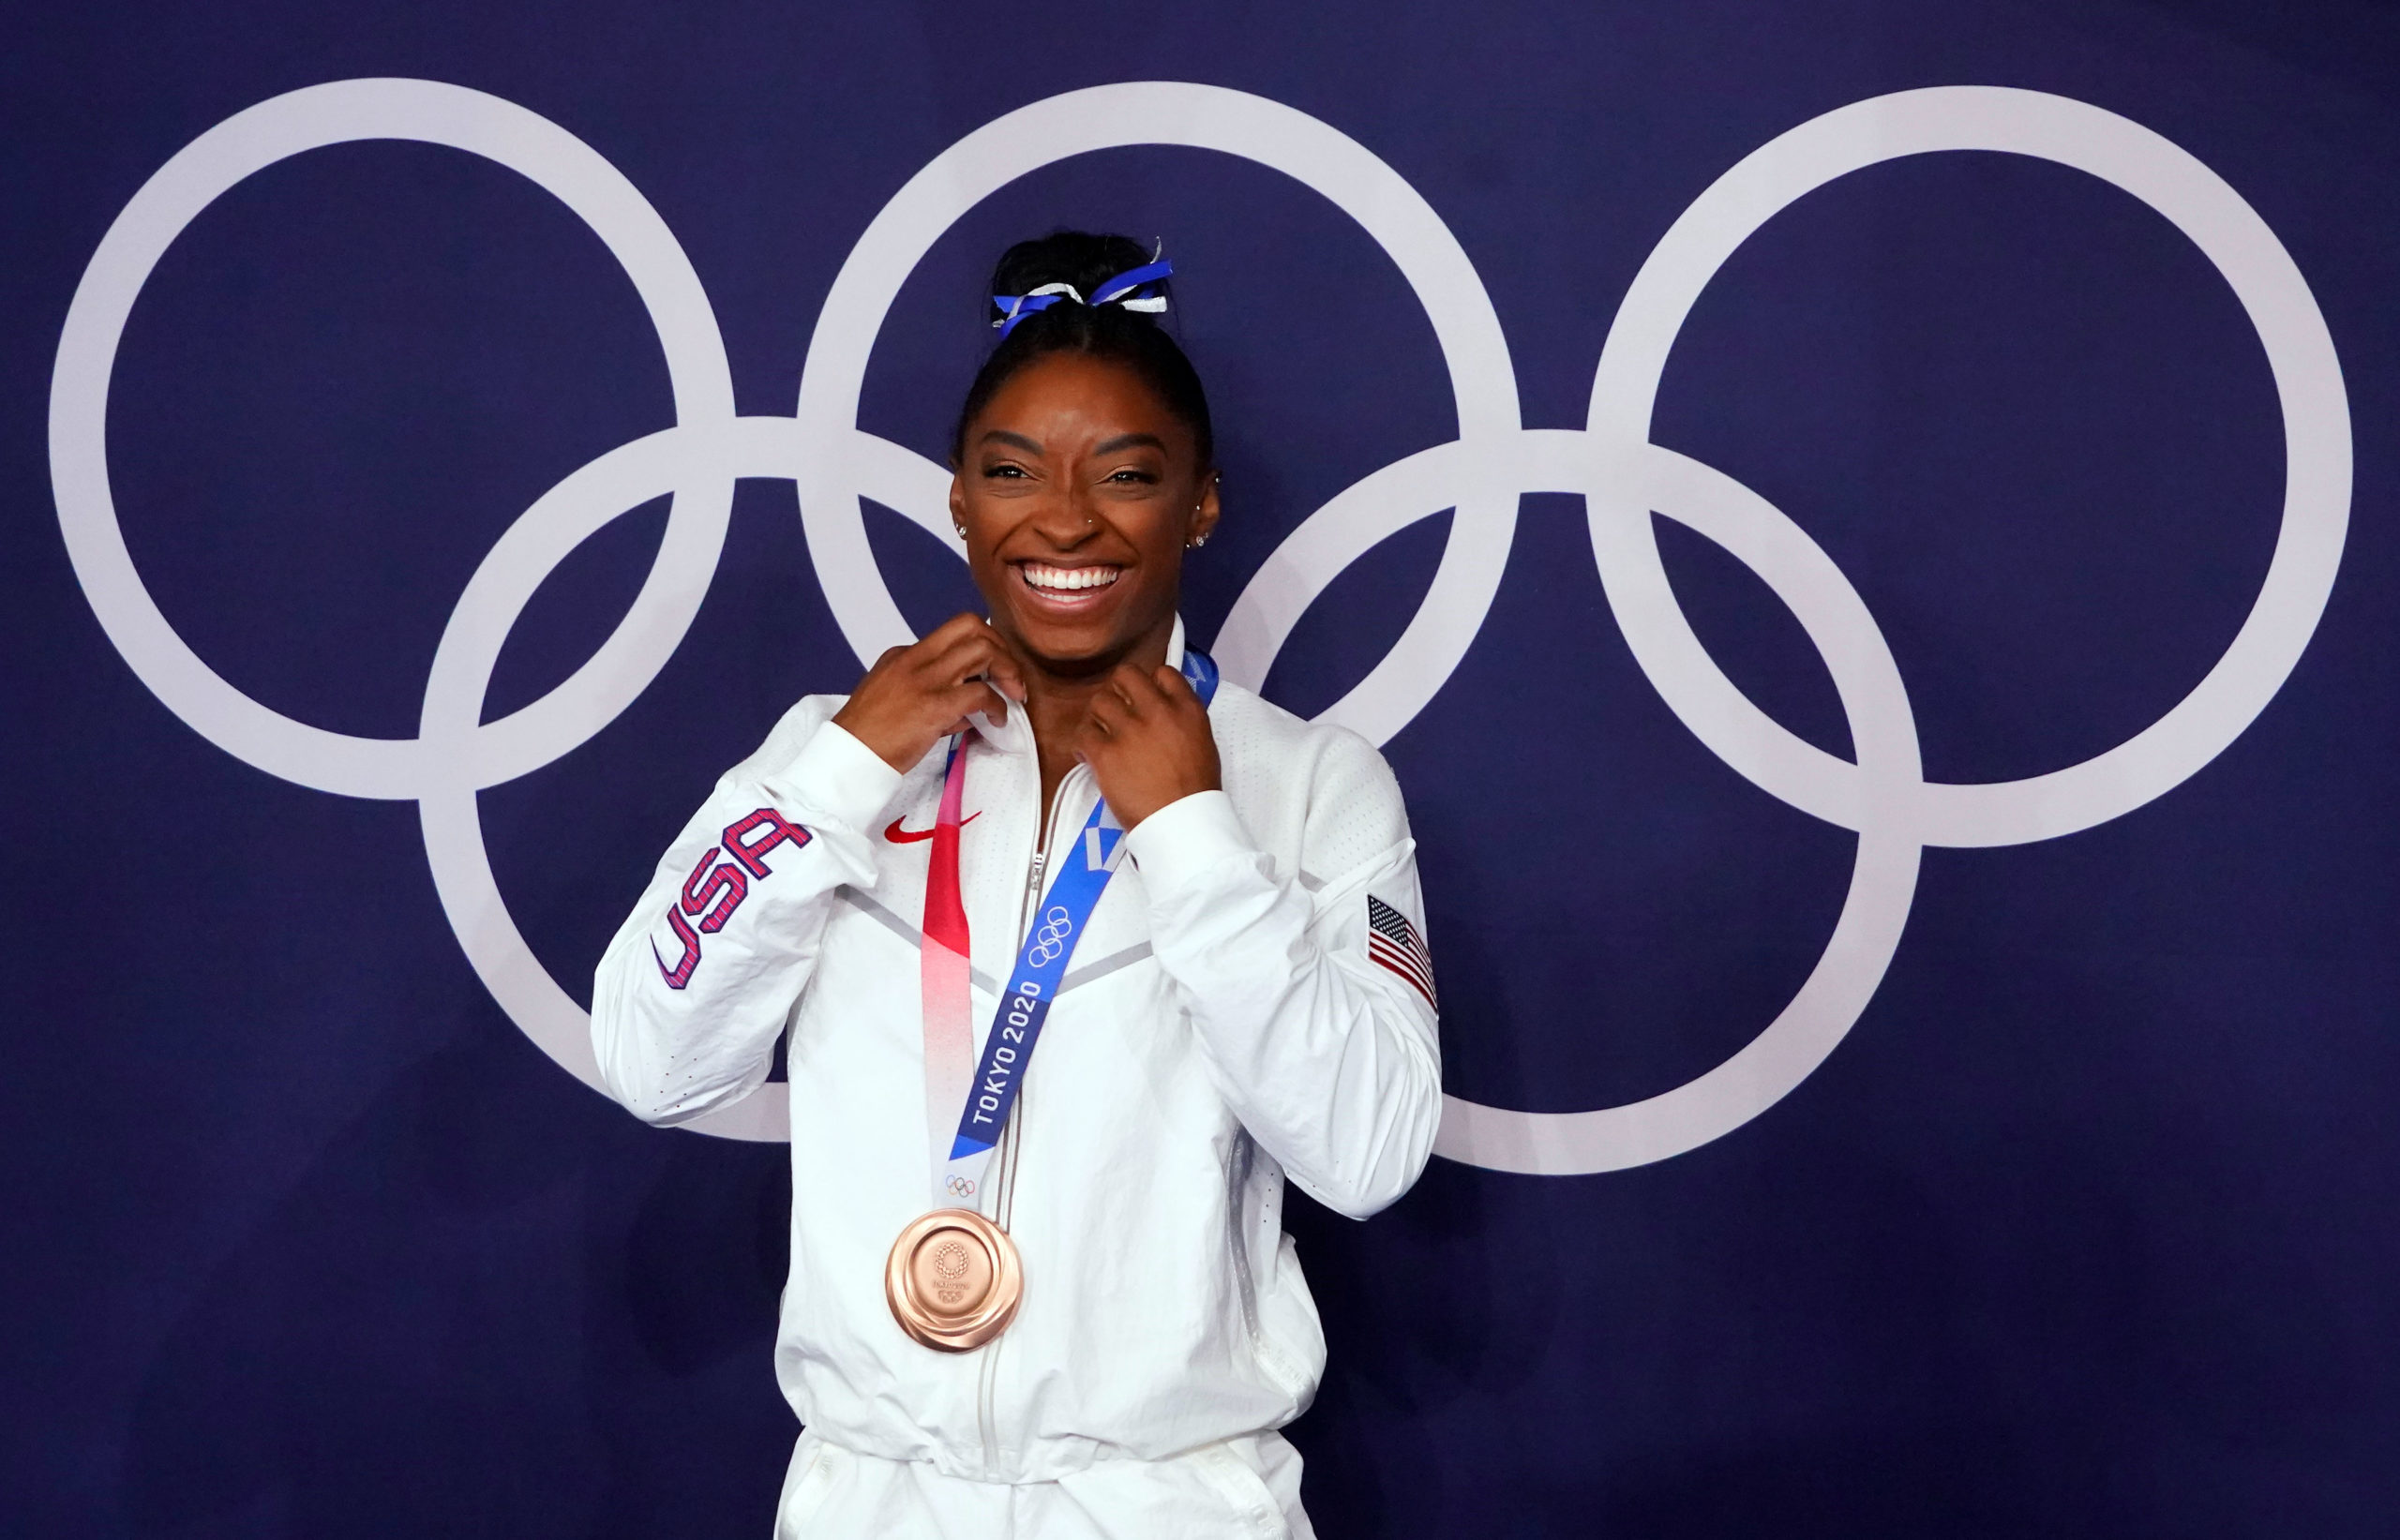 Simone Biles is set to participate in the U.S. Classic event scheduled for August.￼￼￼￼￼￼￼